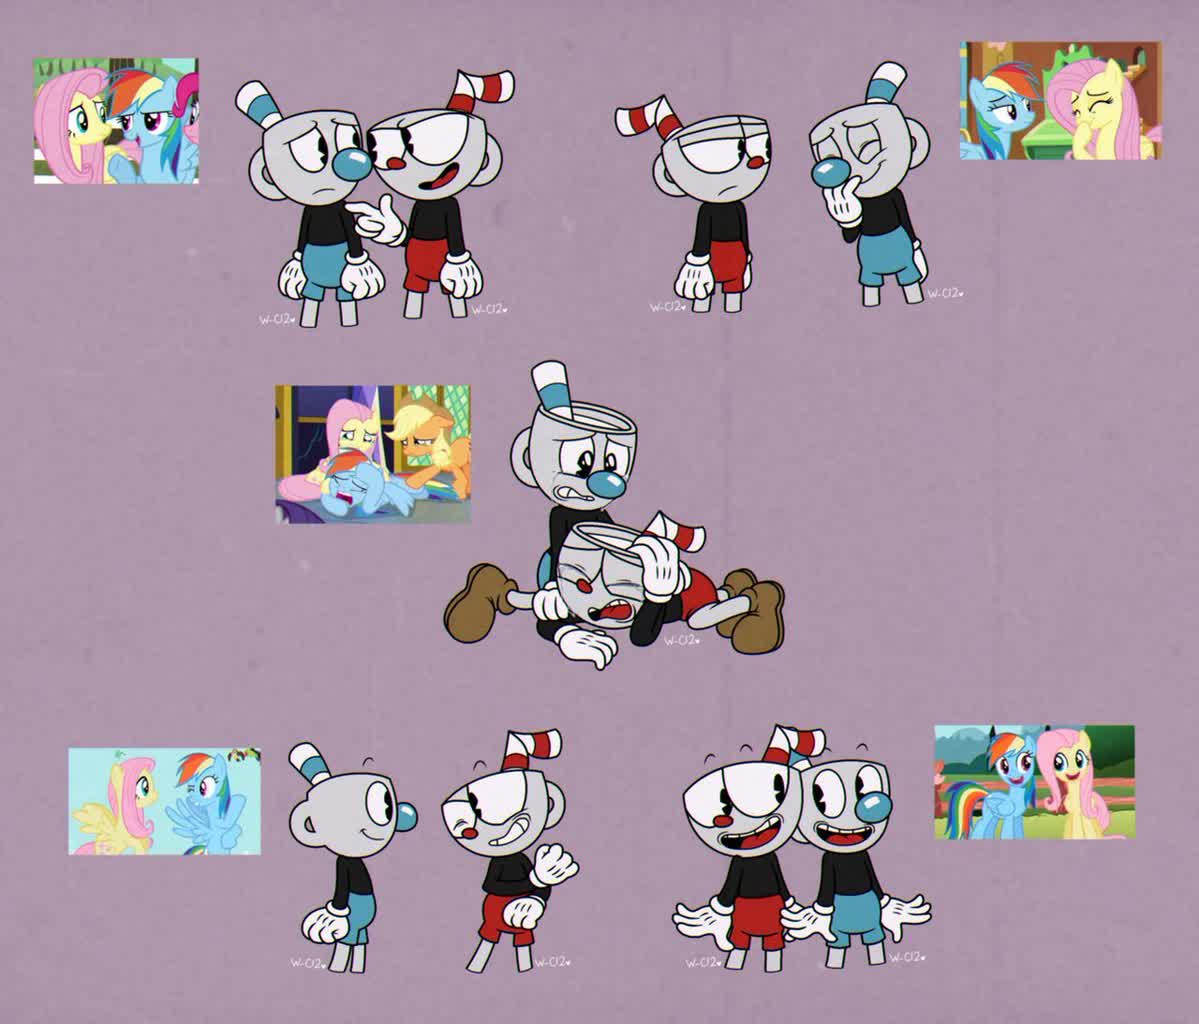 Cuphead in: Problems with the siren (crossover/fanart)